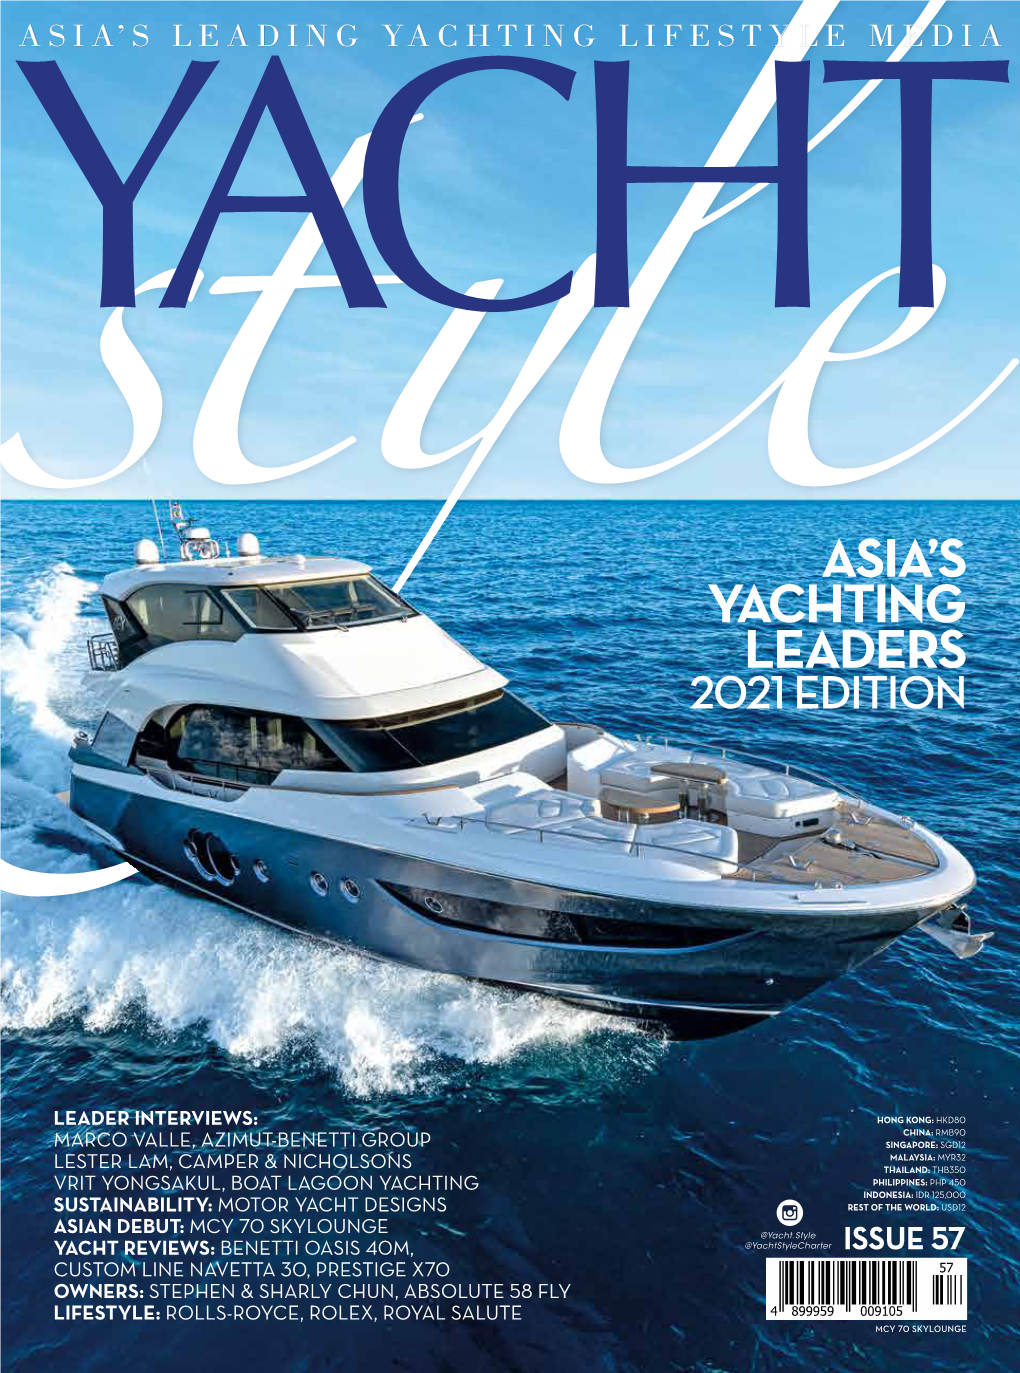 Asia's Yachting Leaders